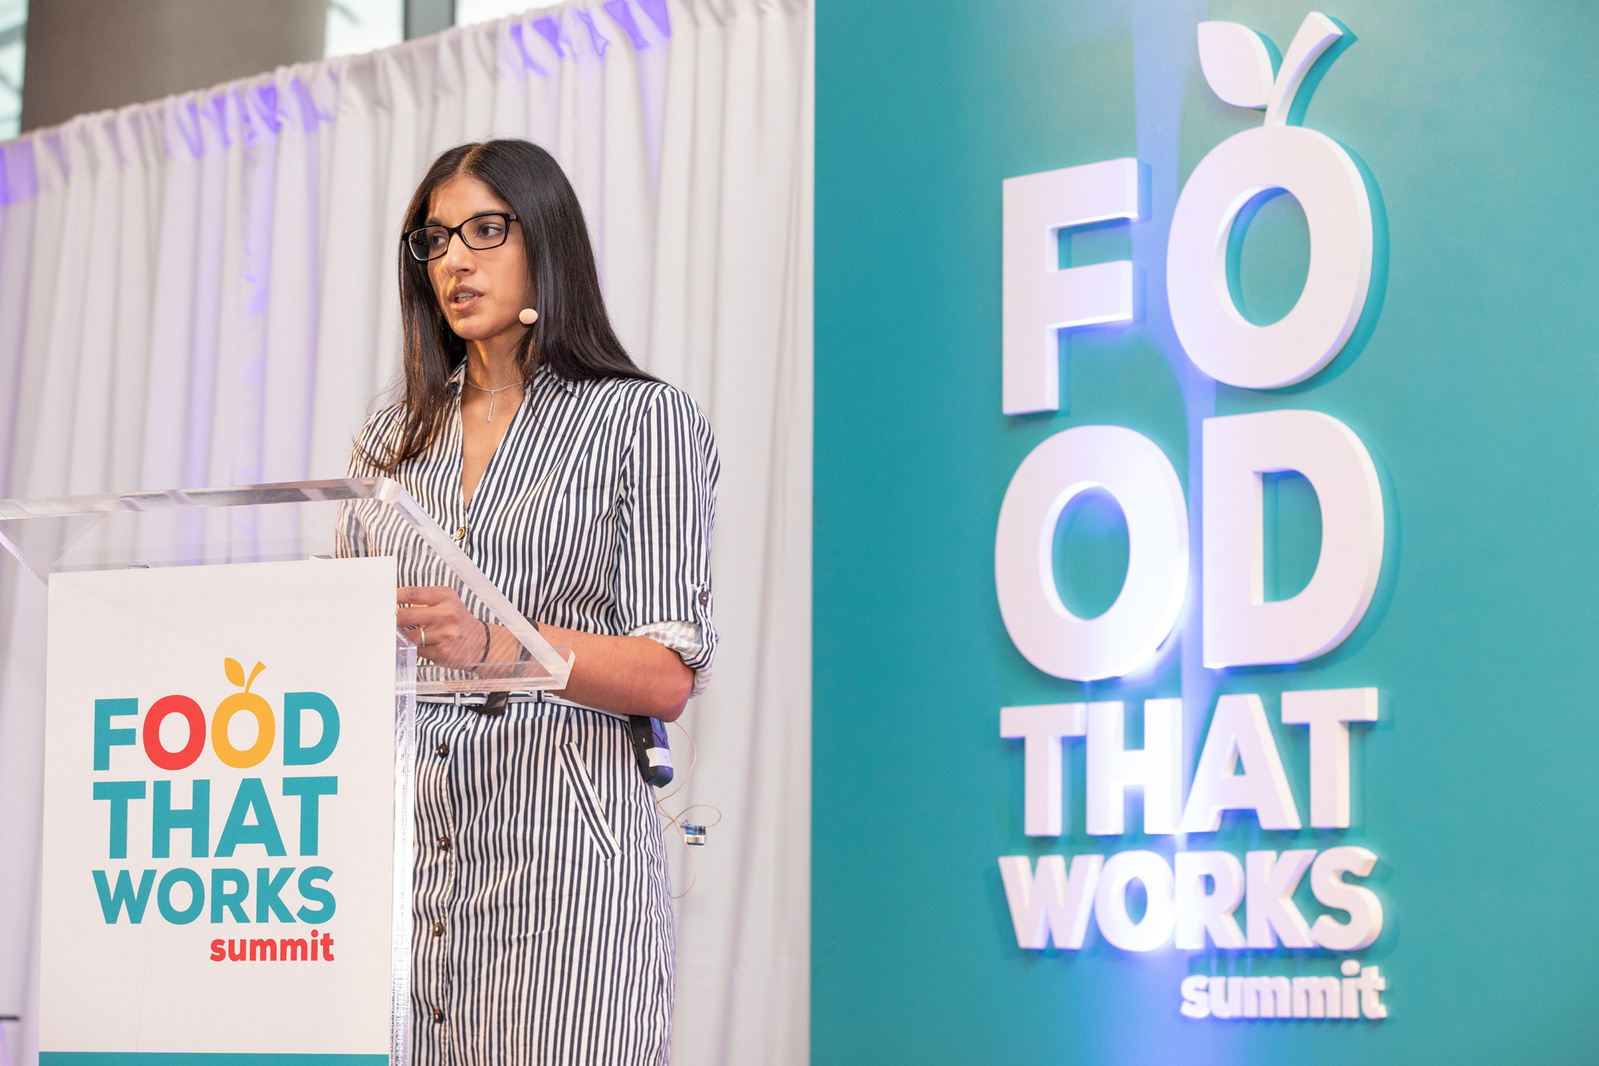 Female speaker at podium Food That Works Summit exhibition and conference photographer Dublin 